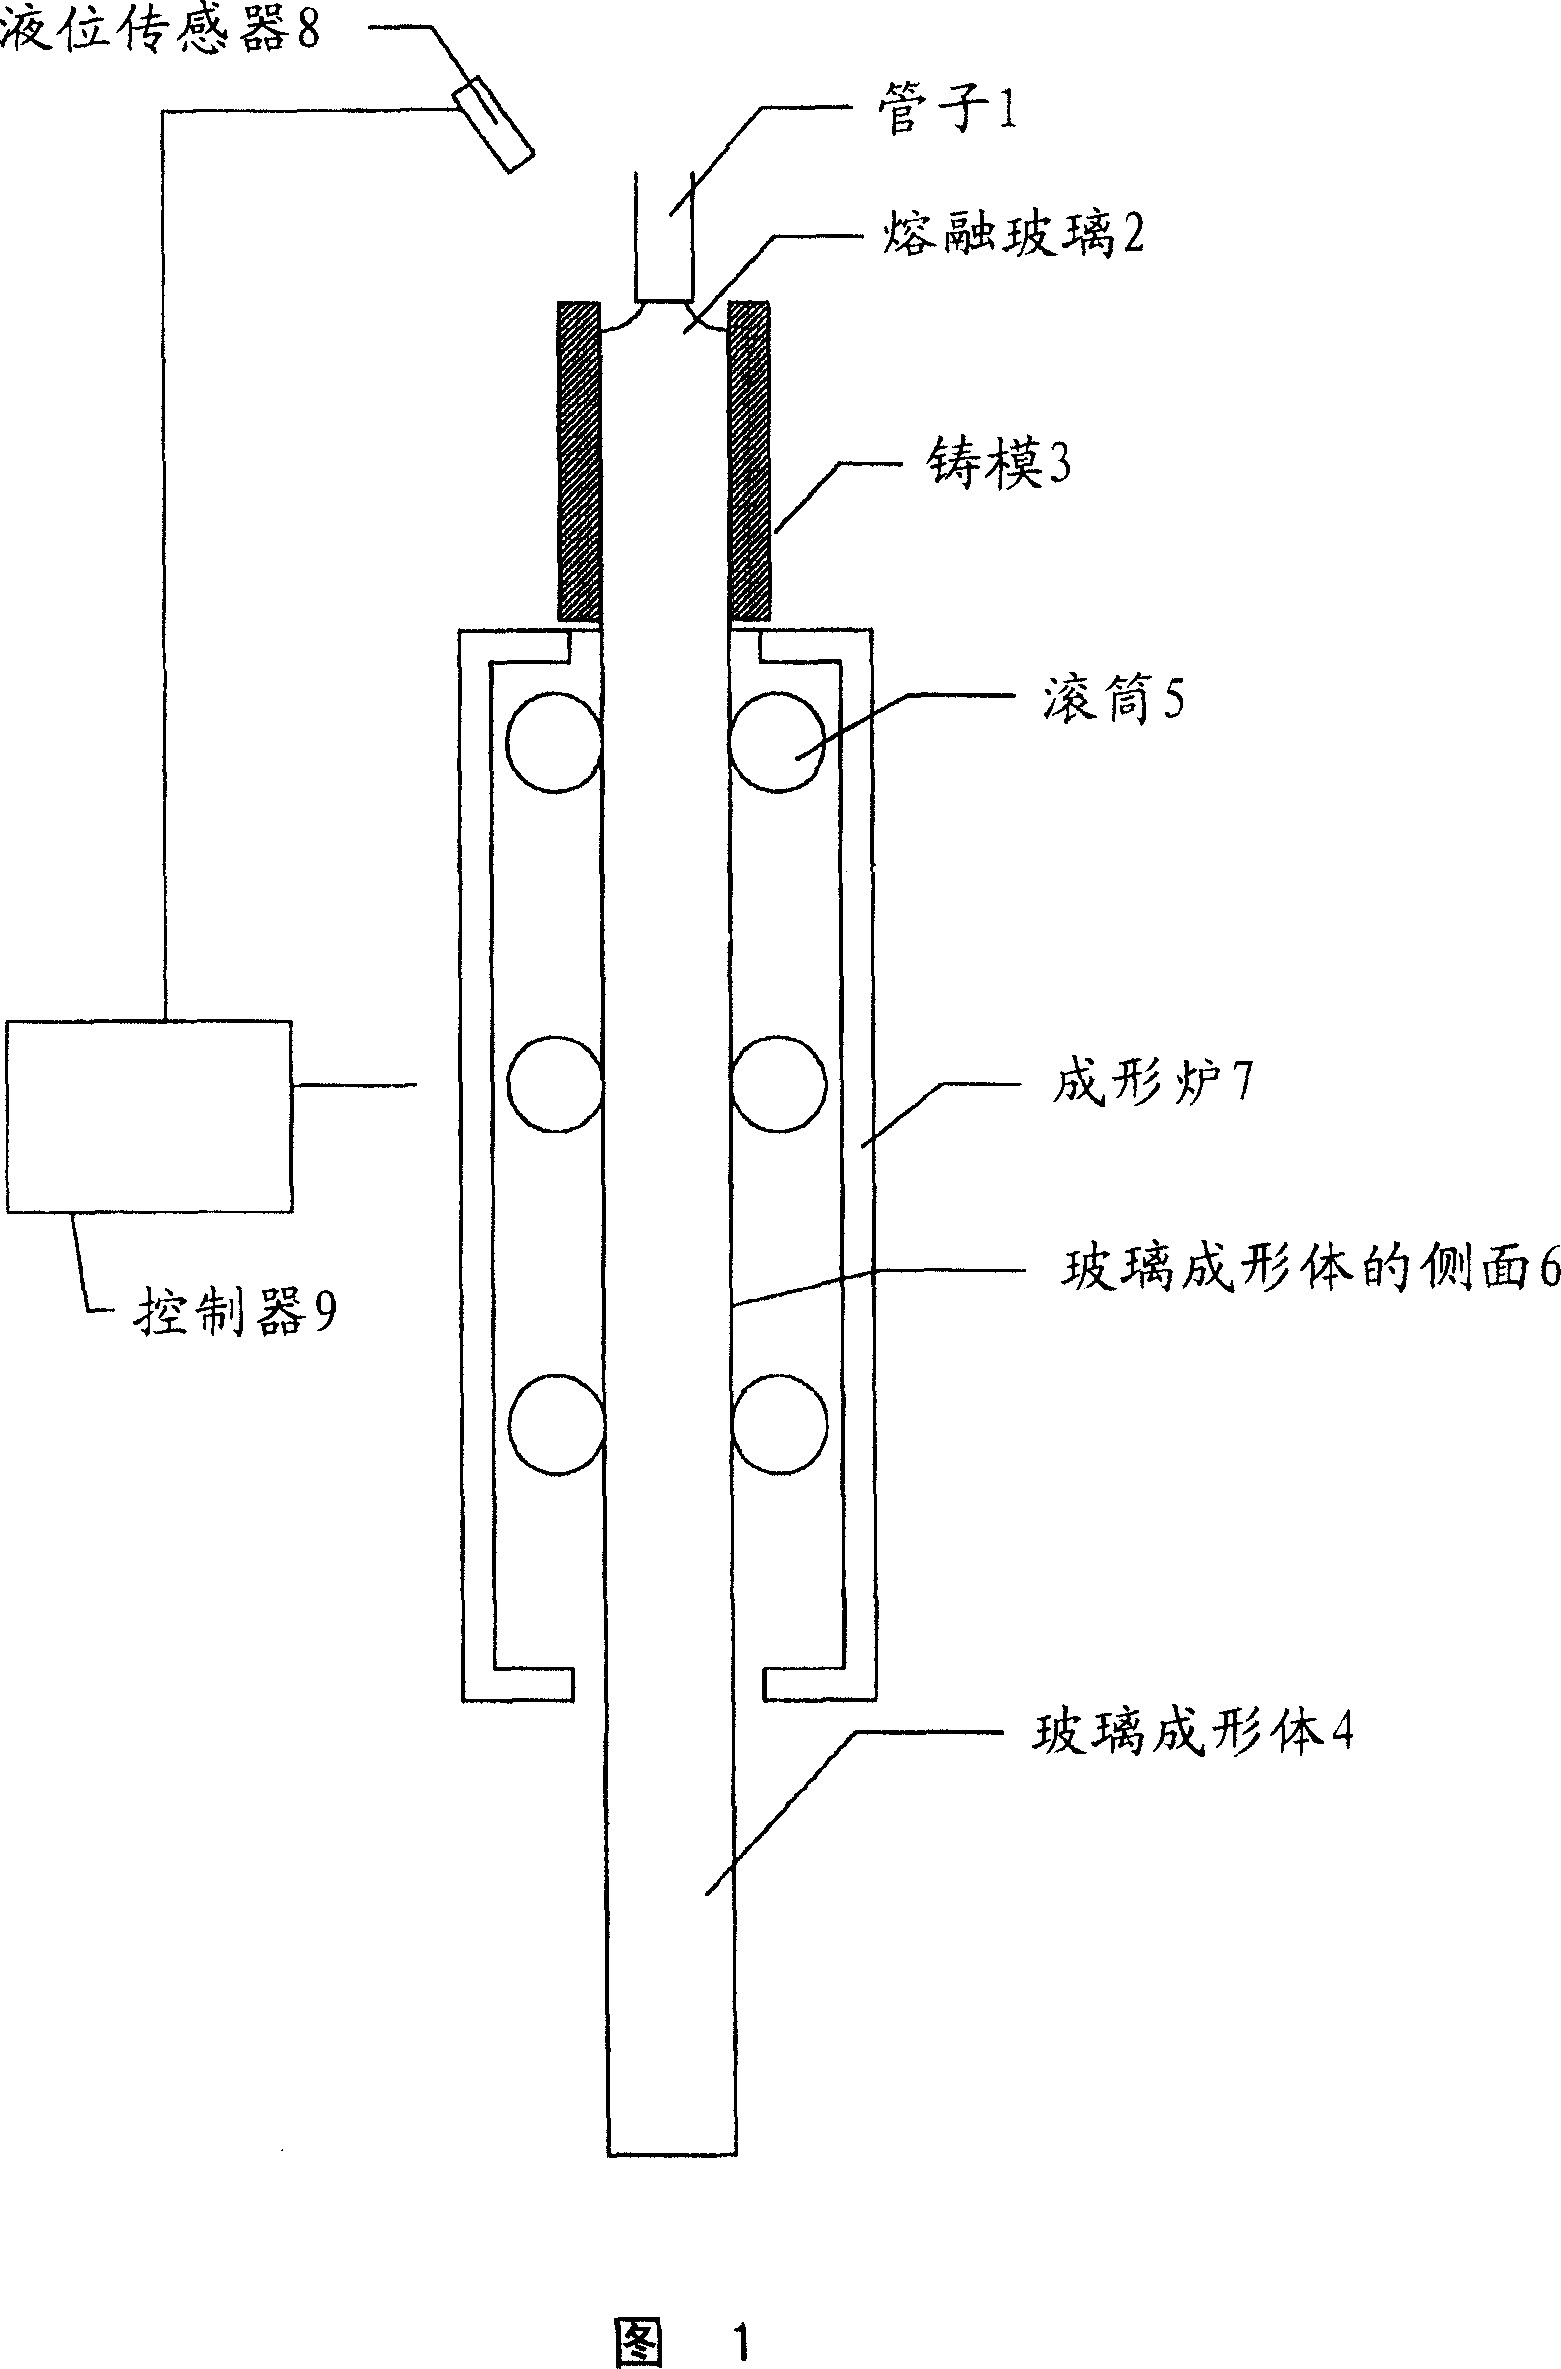 Optical glass, glass cup for die pressing forming, glass forming body, optical element and manufacture method thereof